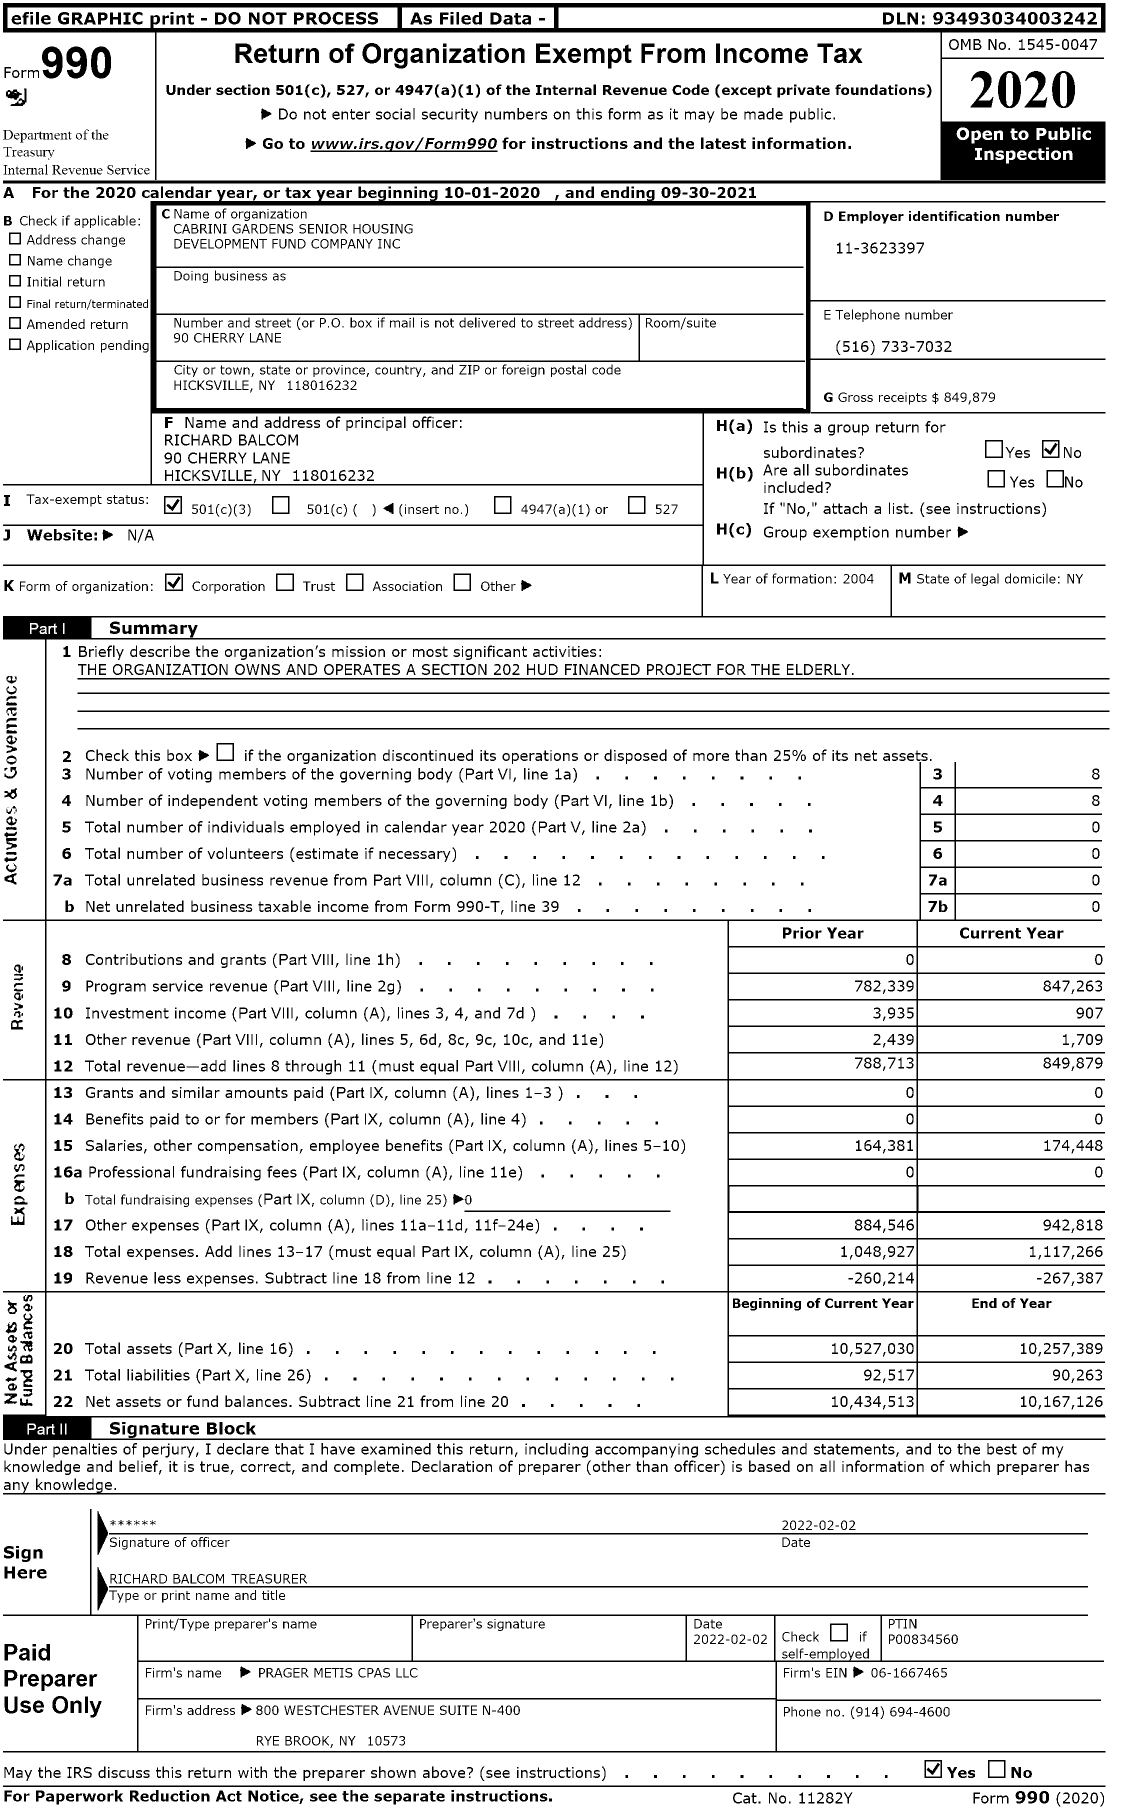 Image of first page of 2020 Form 990 for Cabrini Gardens Senior Housing Development Fund Company